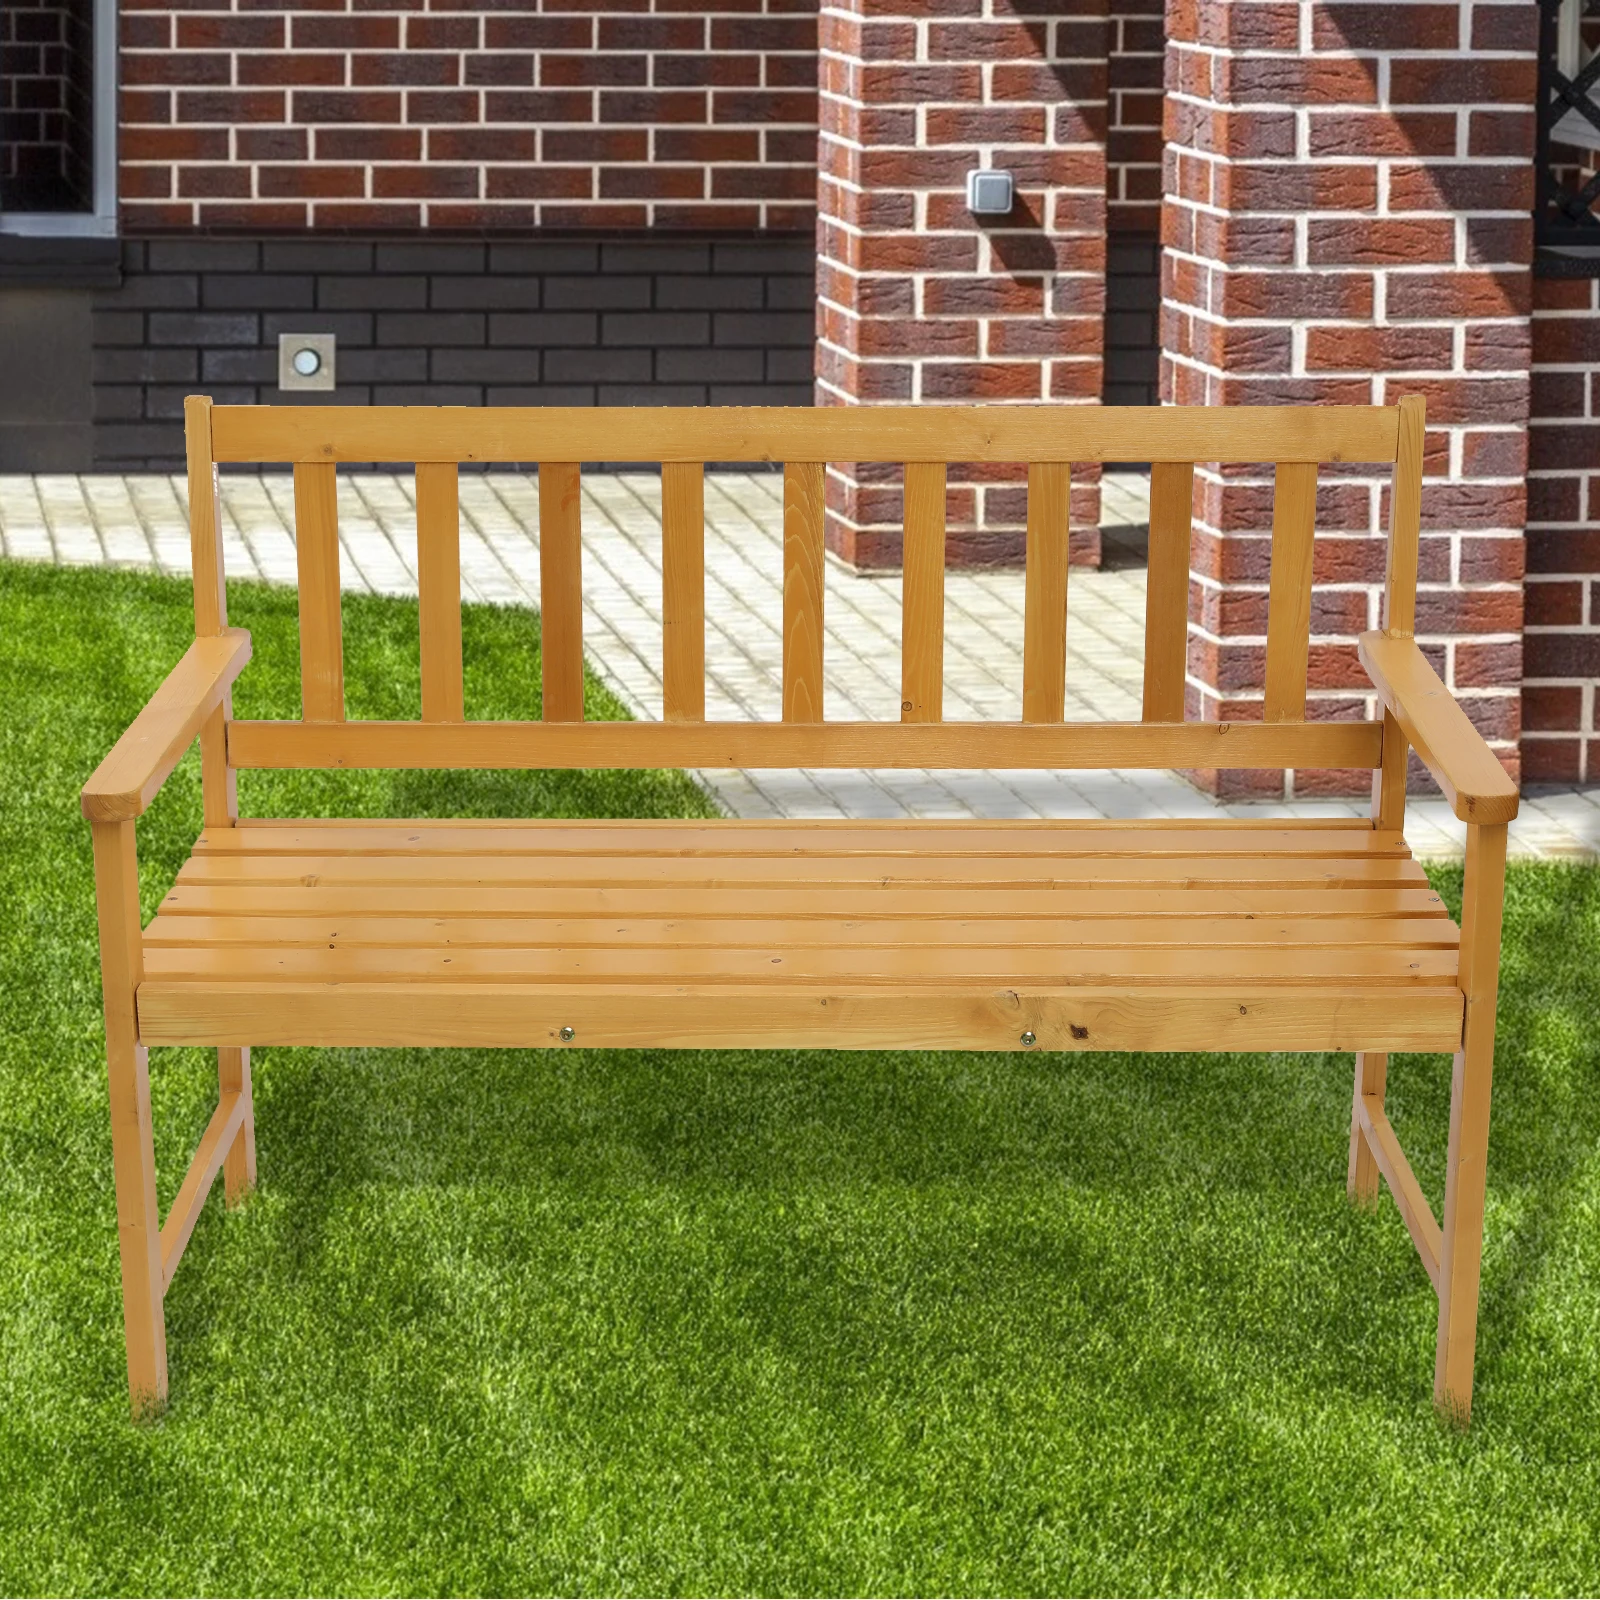 44in Slatted Eucalyptus Wooden Garden Bench for 2 Seater in Entry Way for Outdoor, Park, Yard, Patio Furniture Chair Teak Color 1pc 1 12 scale mini miniature striped wooden summer lounge chair for beach seaside garden yard furniture decor toy 11x5cm